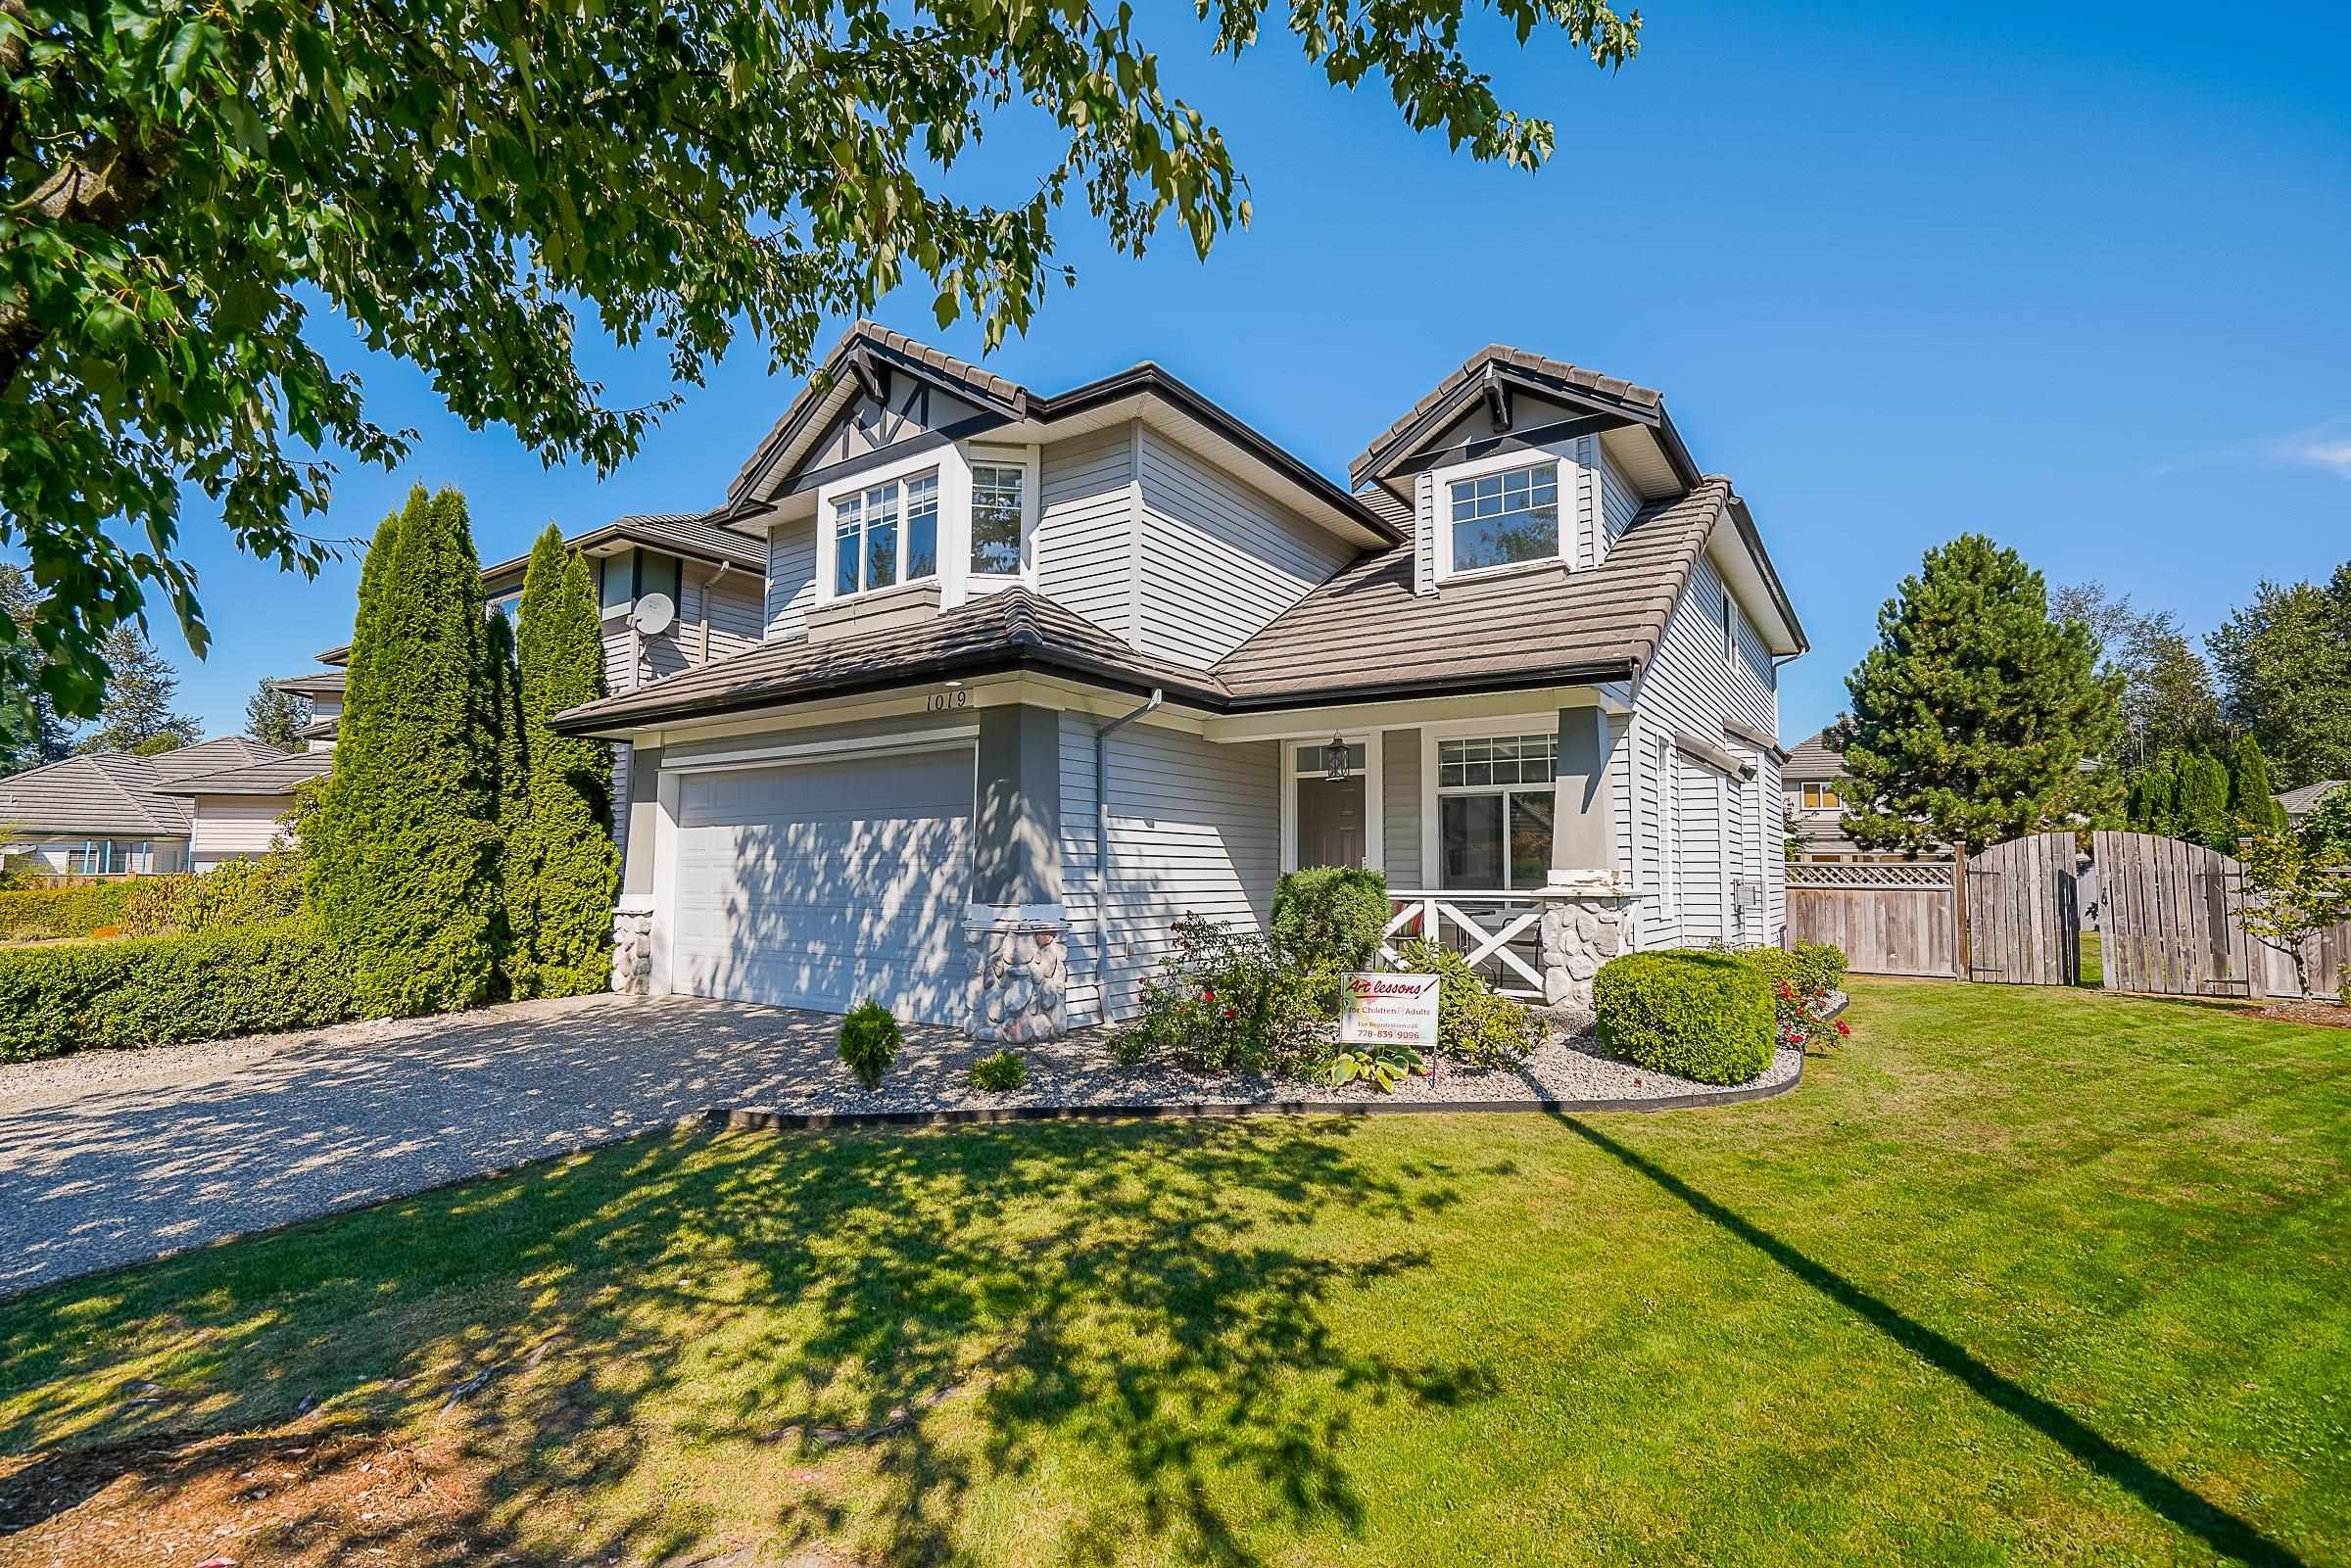 New property listed in Riverwood, Port Coquitlam